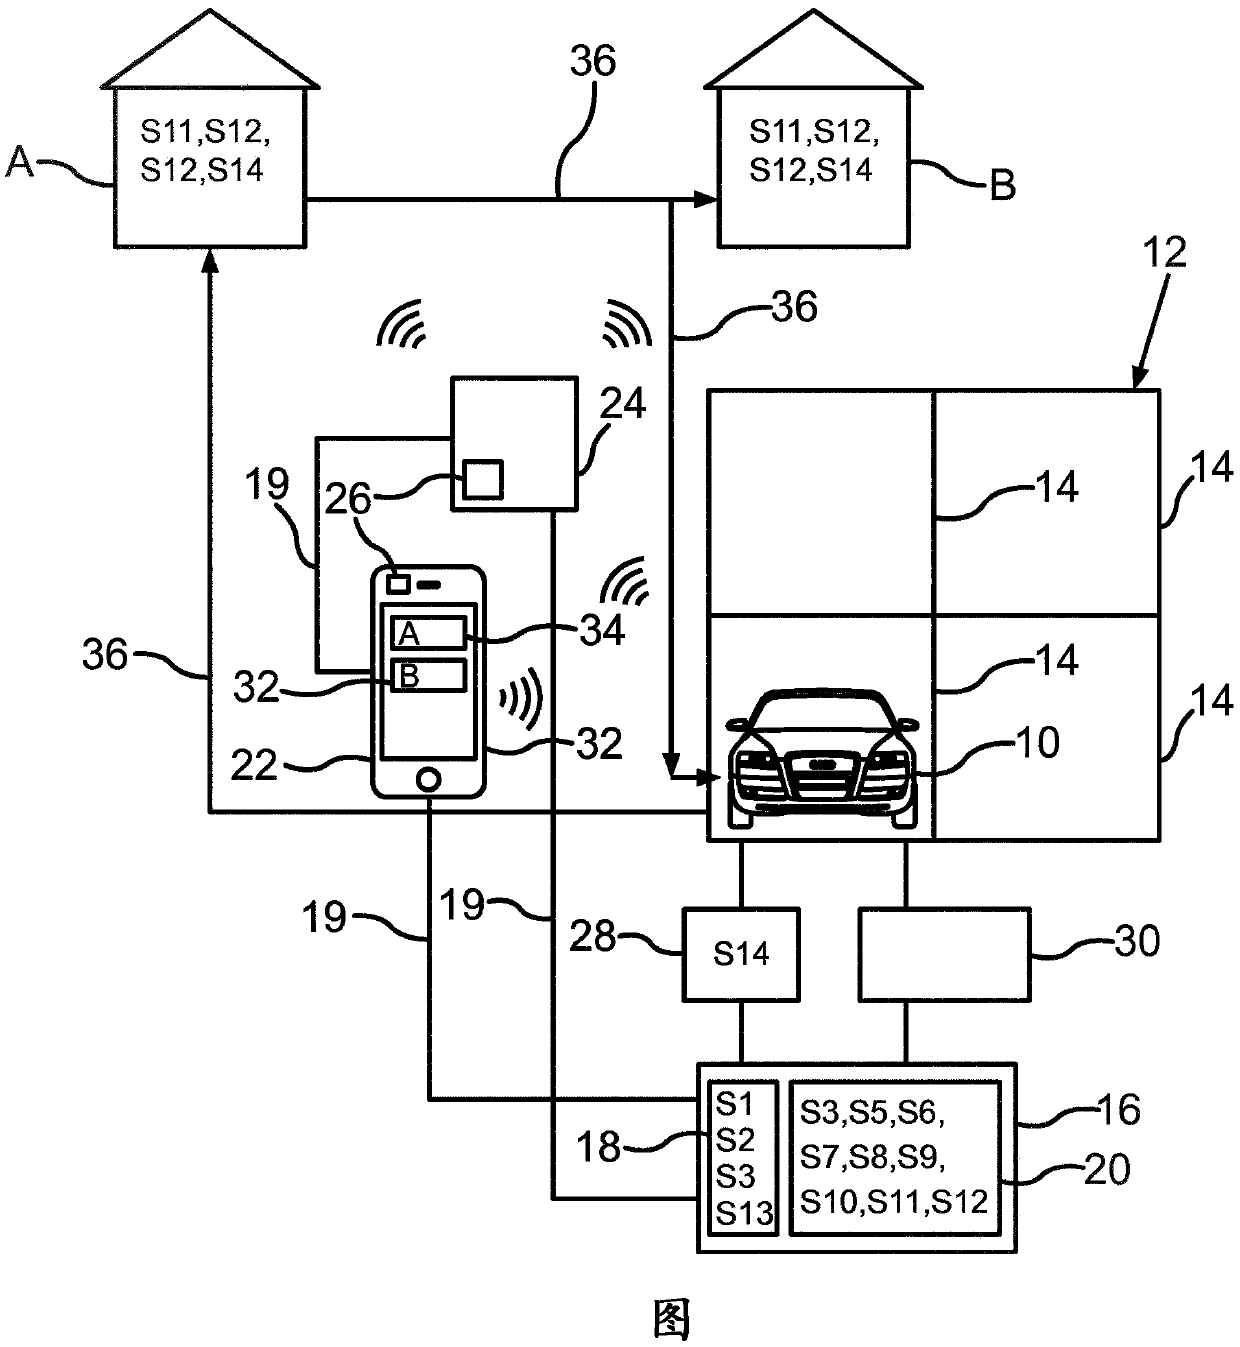 Method for operating motor vehicle in fully autonomous driving mode